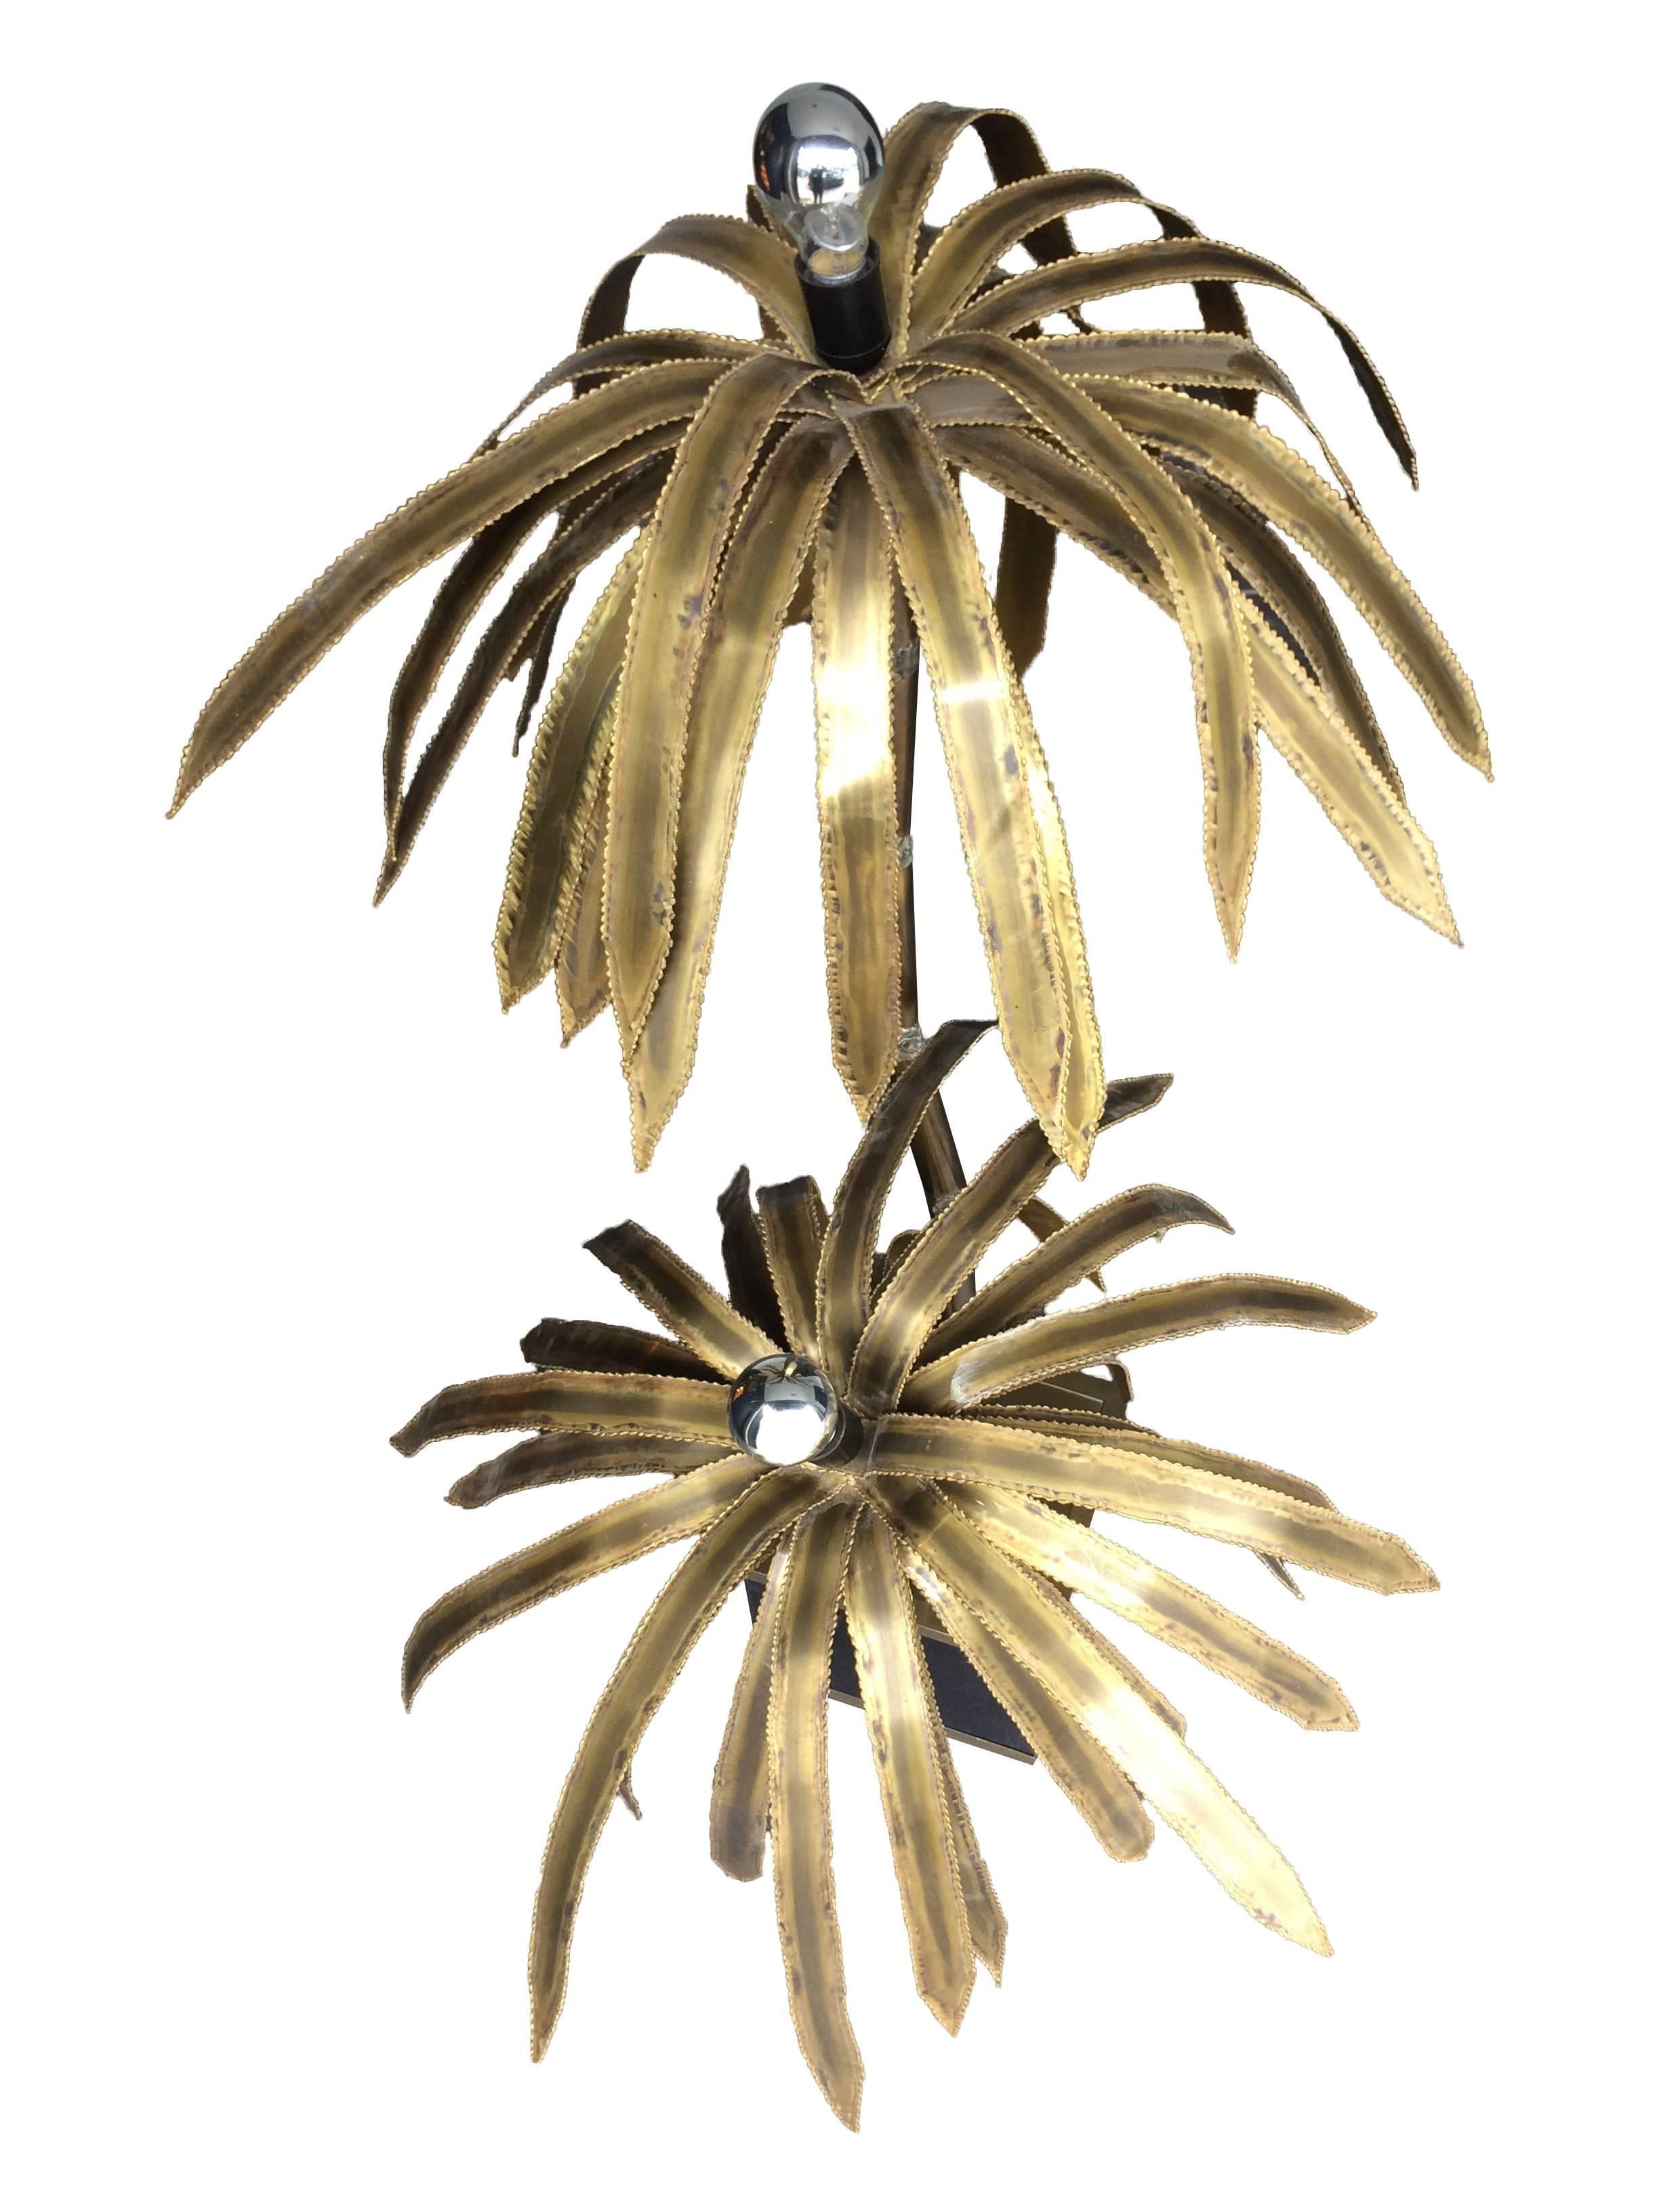 A Maison Jansen double palm tree floor lamp with two palm trees each with torch cut brass fronds, with a central bulb in each, coming off a faux bamboo metal trunk and mounted on a brass and black felt covered base. 
Re wired with black cord flex